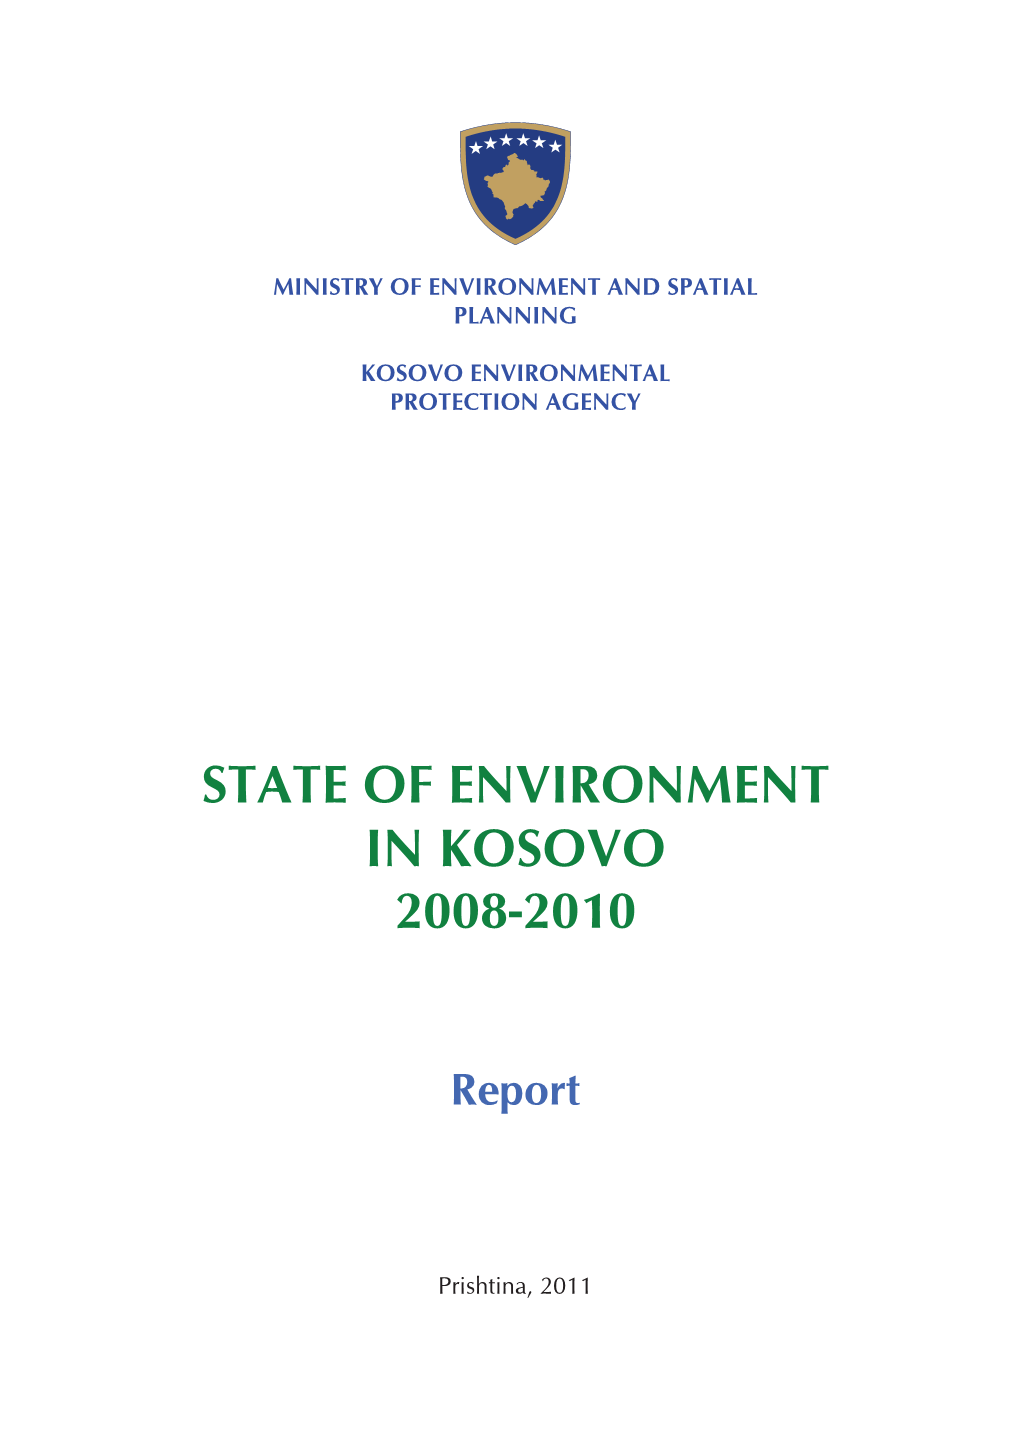 State of Environment in Kosovo 2008-2010